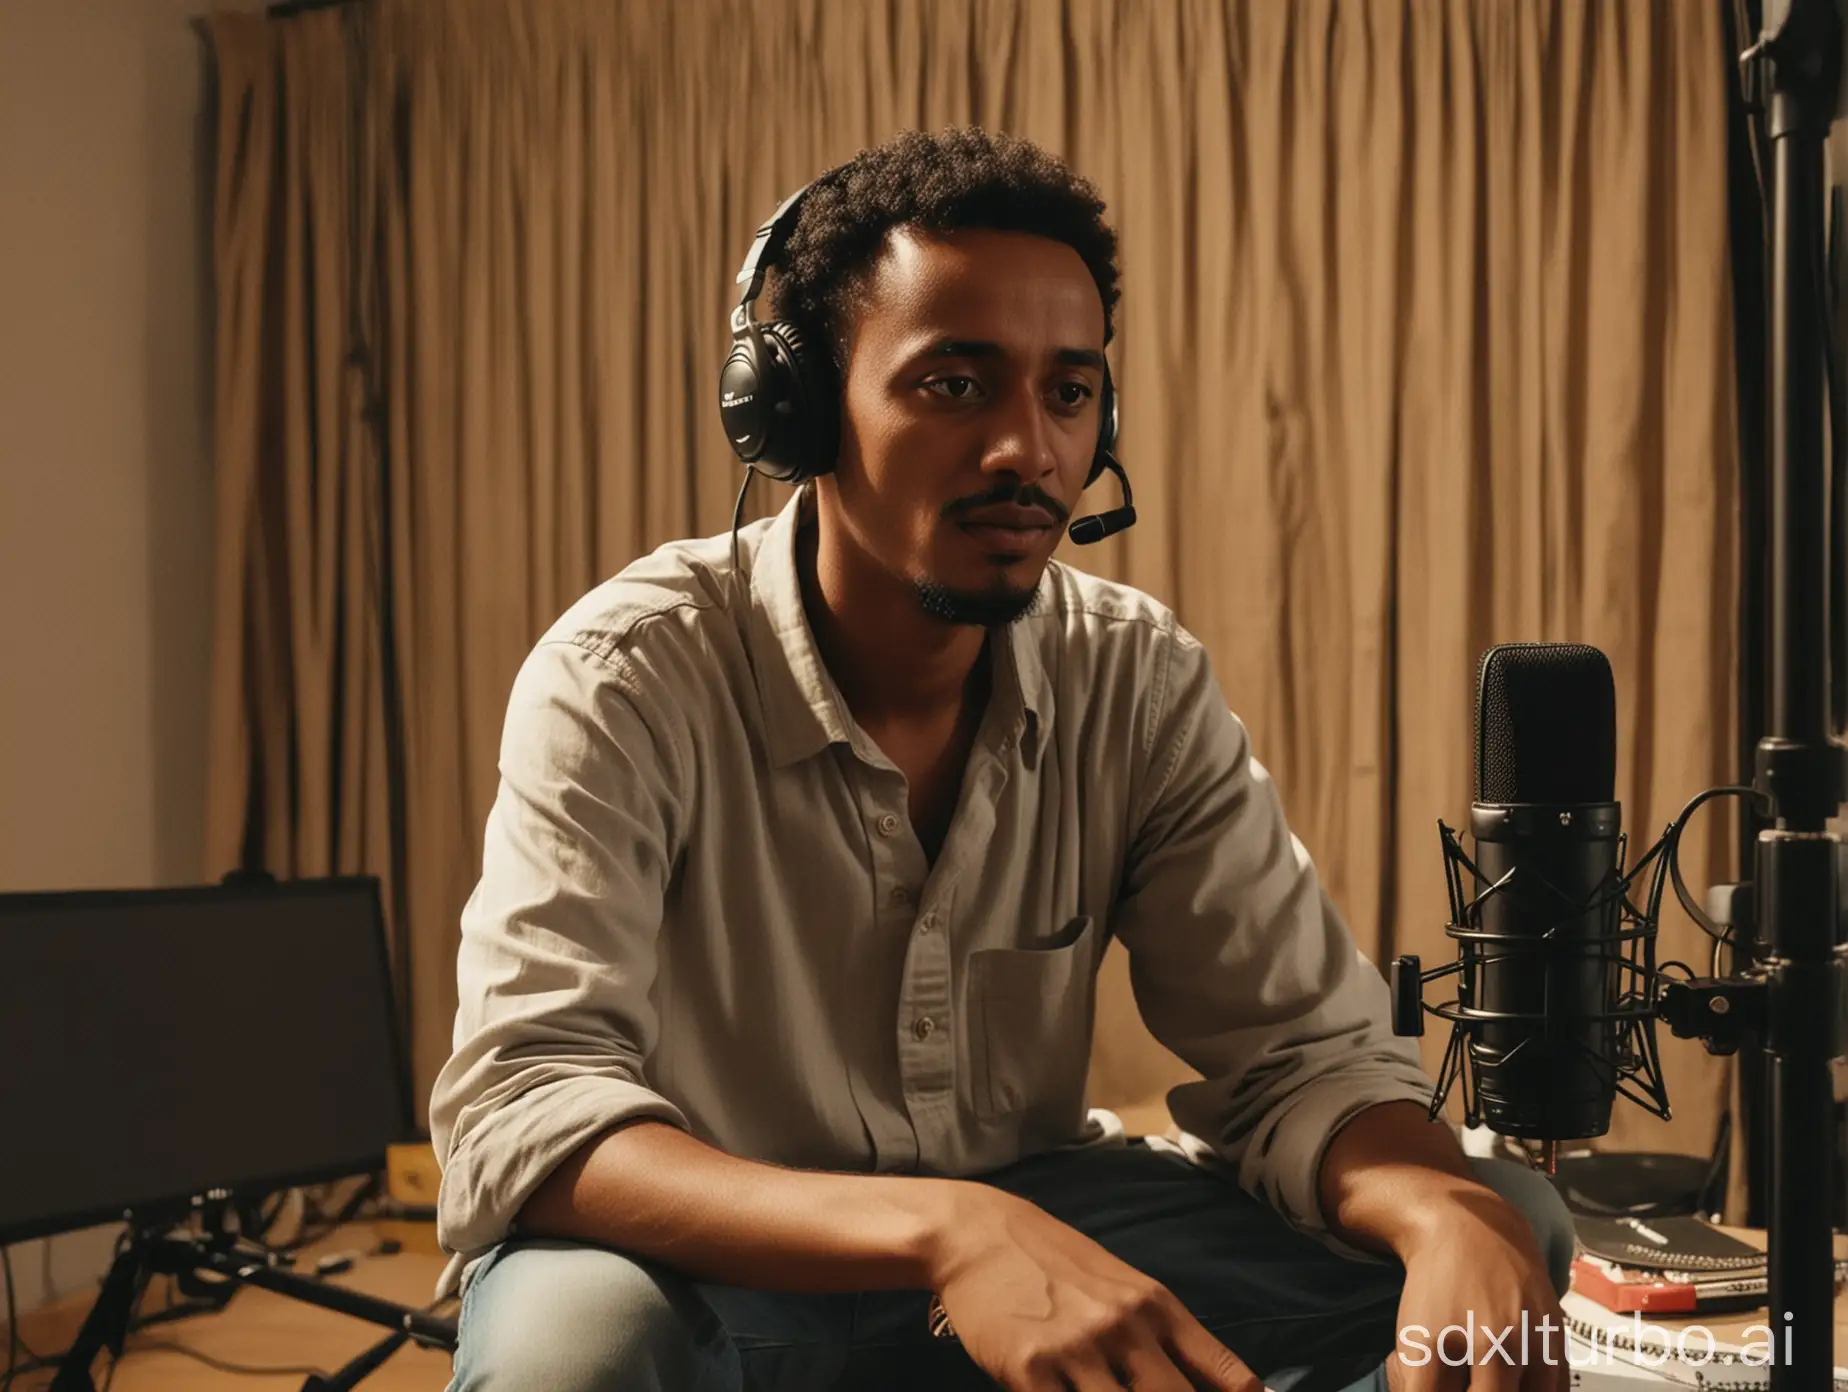 A man sitting in his studio recording a yt video habesha man